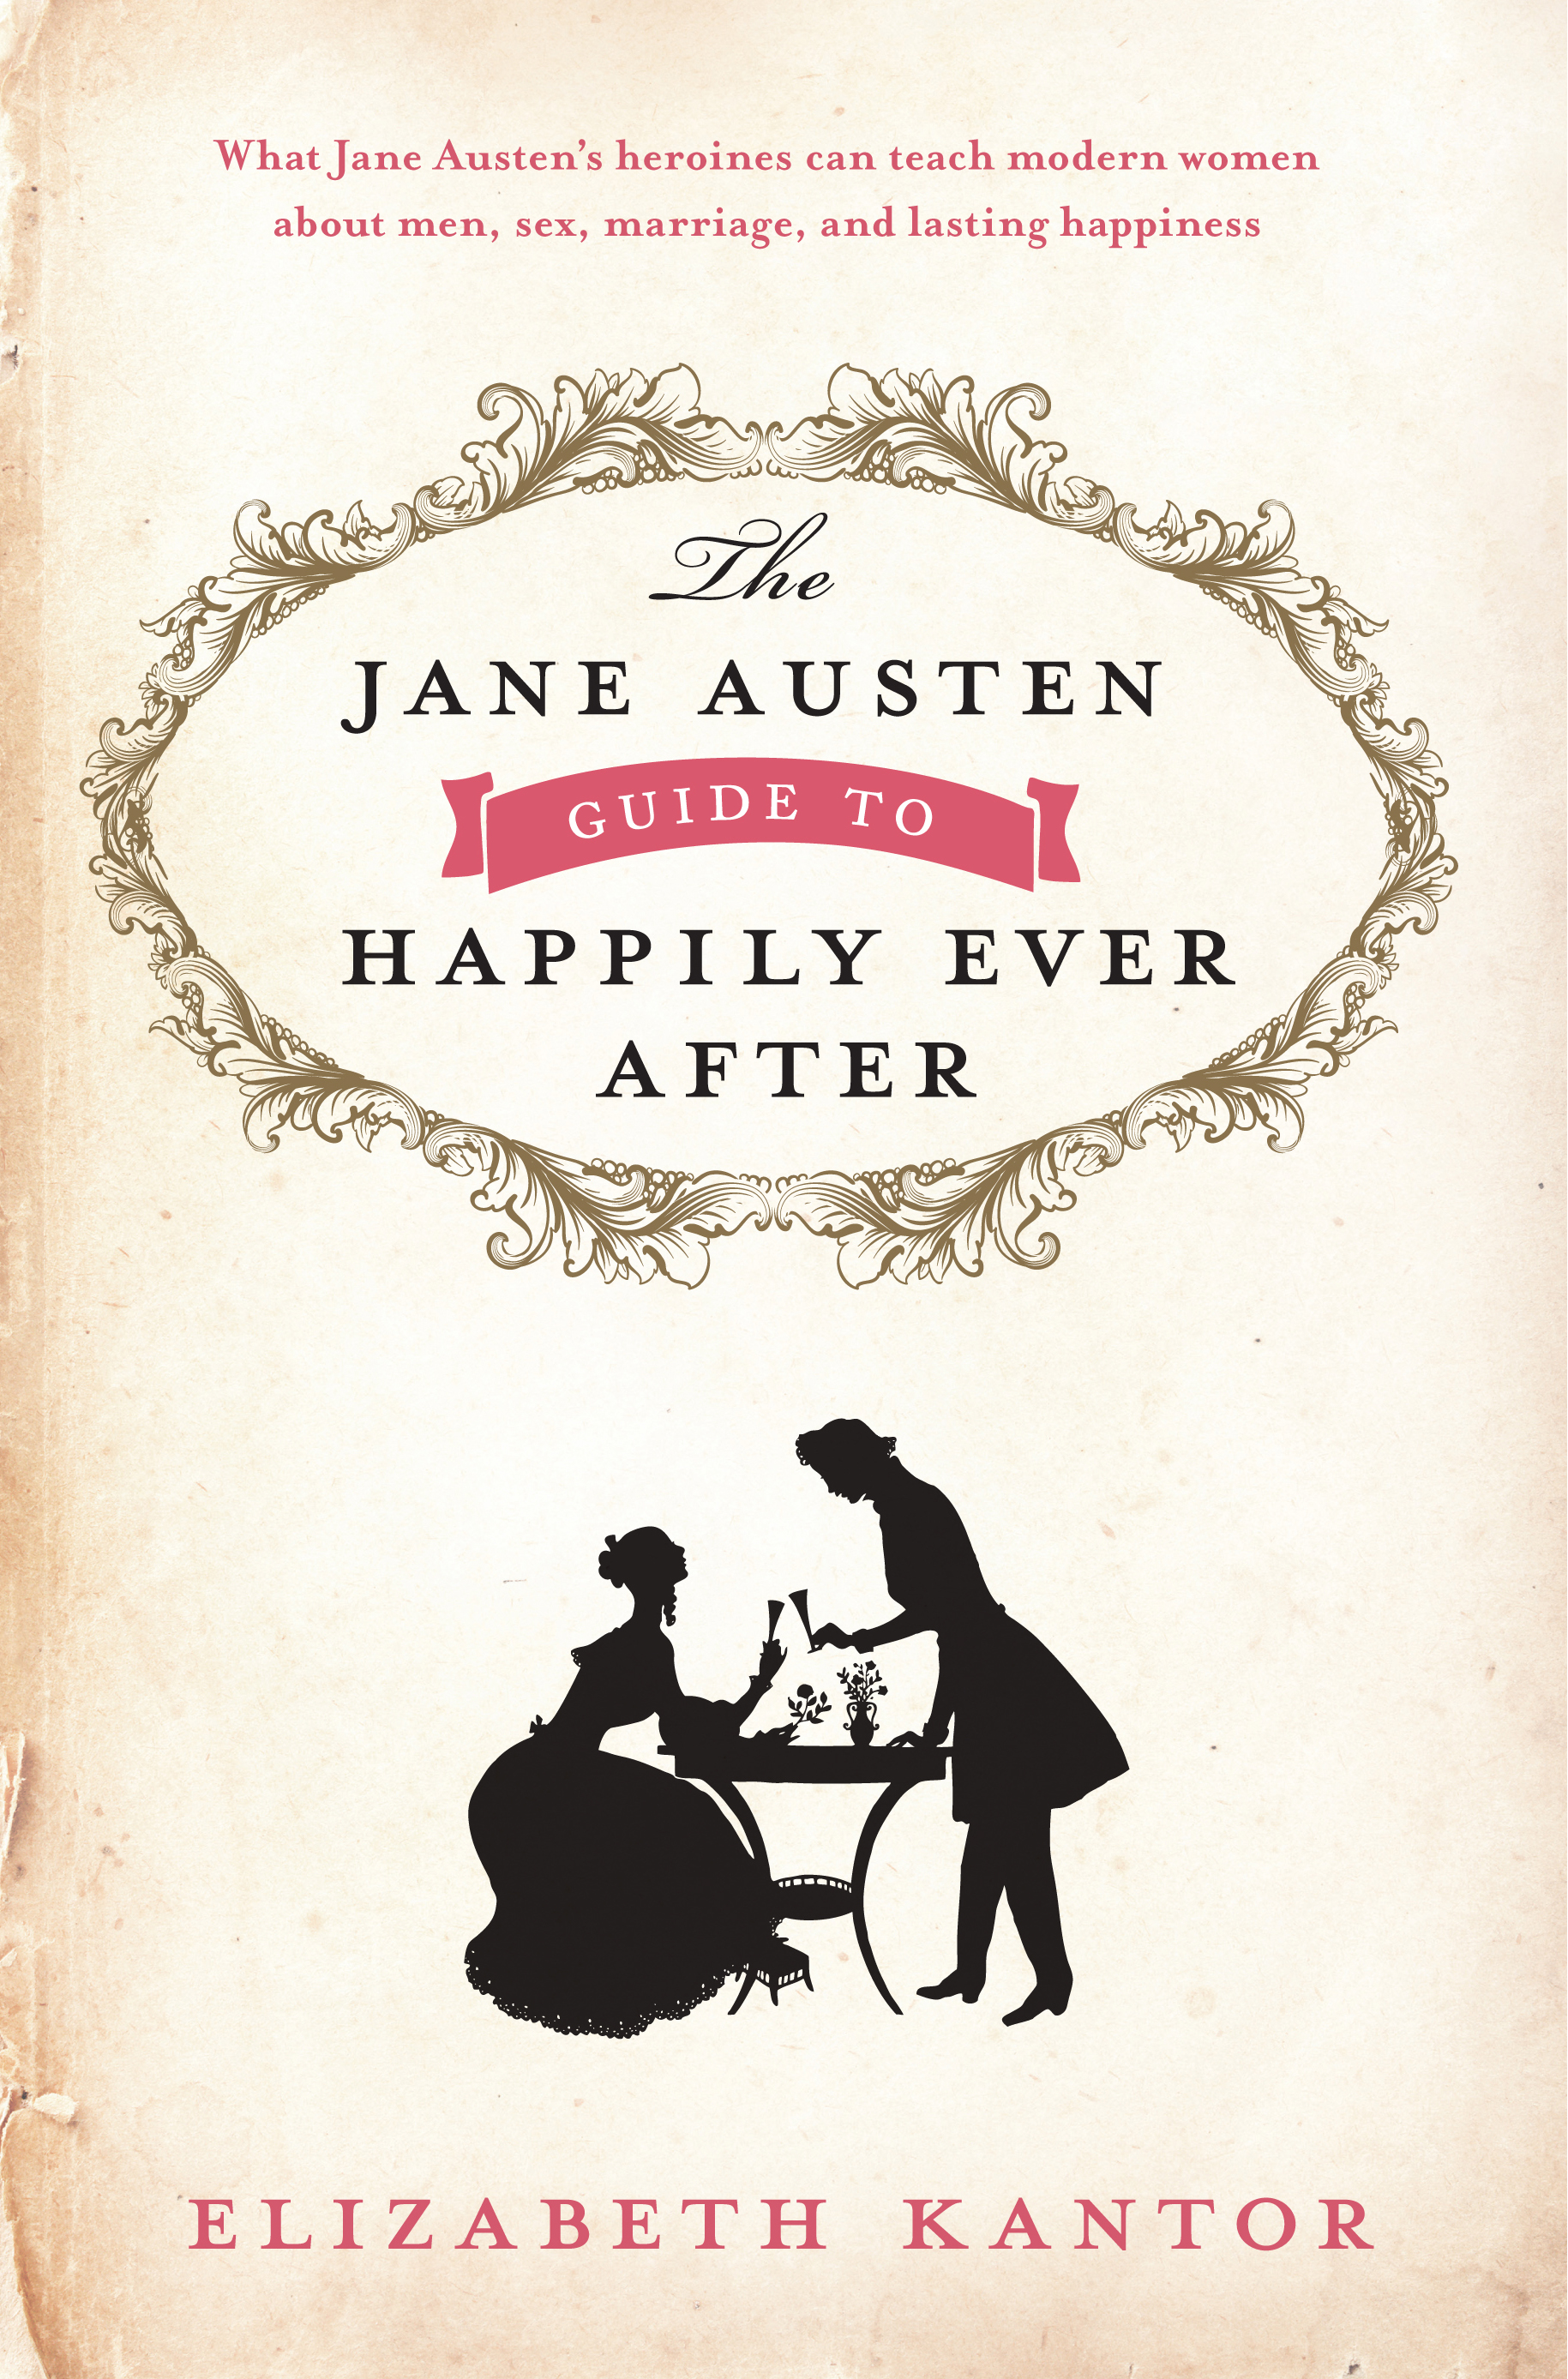 Everything I Need to Know about Love, I Learned from Jane Austen